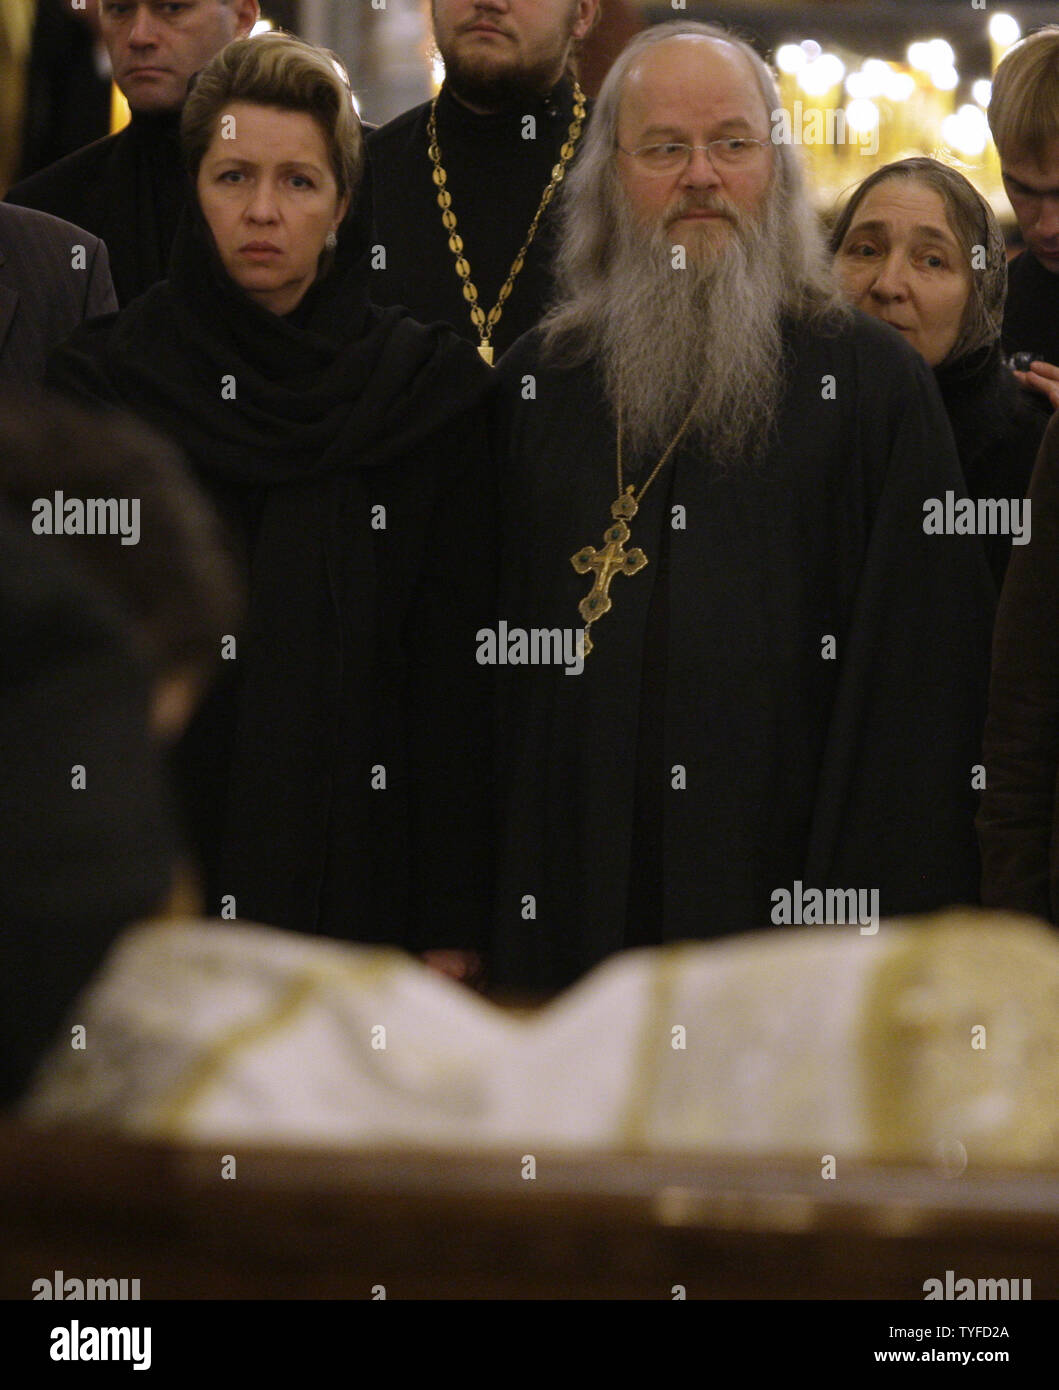 Russian first lady Svetlana Medvedeva (L) mourns at a casket with late Patriarch Alexy II in the Christ the Savior Cathedral in Moscow on December 7, 2008. Patriarch Alexy II who led the Russian Orthodox church since 1990 during a post-Soviet revival of faith, died at the age of 79 on Friday. (UPI Photo/Anatoli Zhdanov) Stock Photo